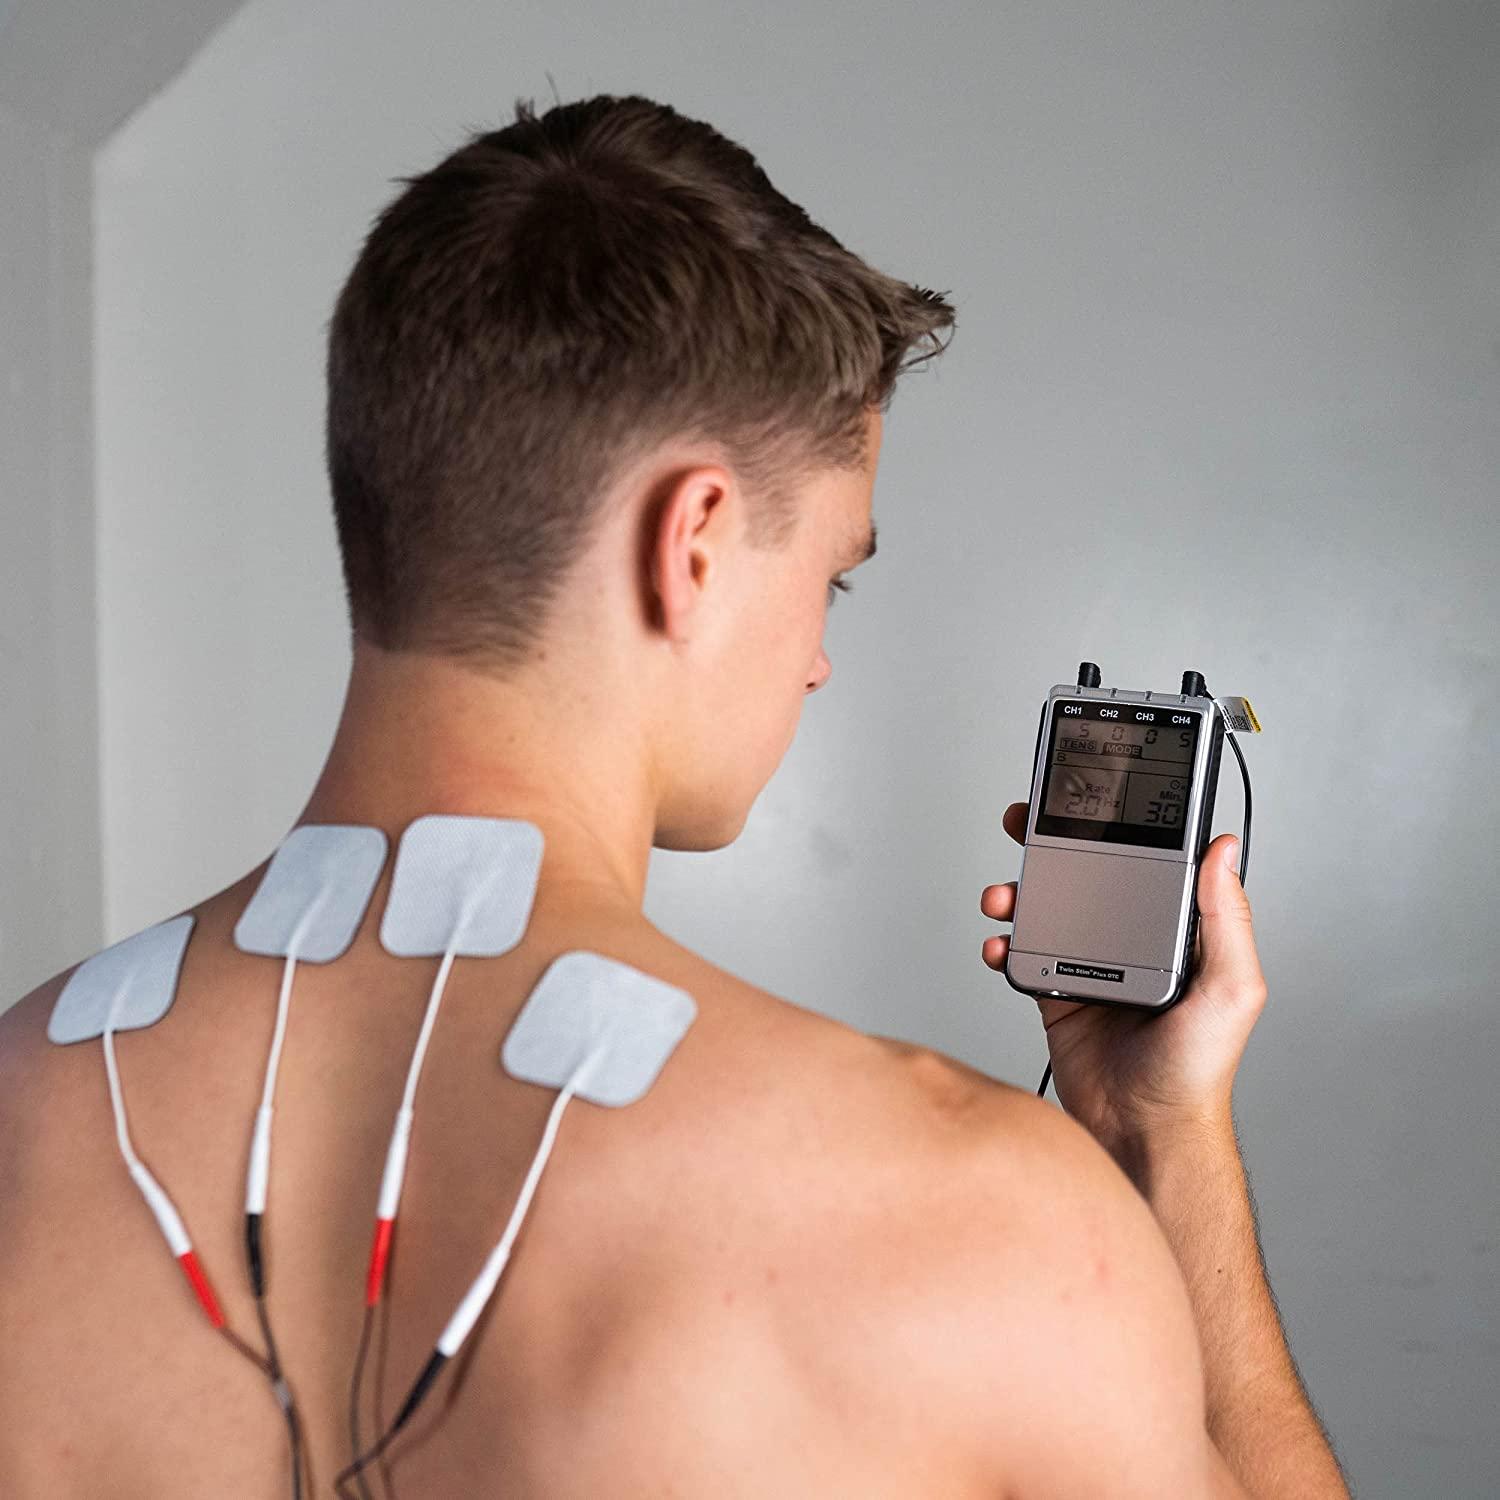 Roscoe Medical TENS Unit and EMS Muscle Stimulator - OTC TENS Machine for  Back Pain Relief, Lower Back Pain Relief, Neck Pain, or Sciatica Pain Relief,  Clinical Strength Stim Machine 